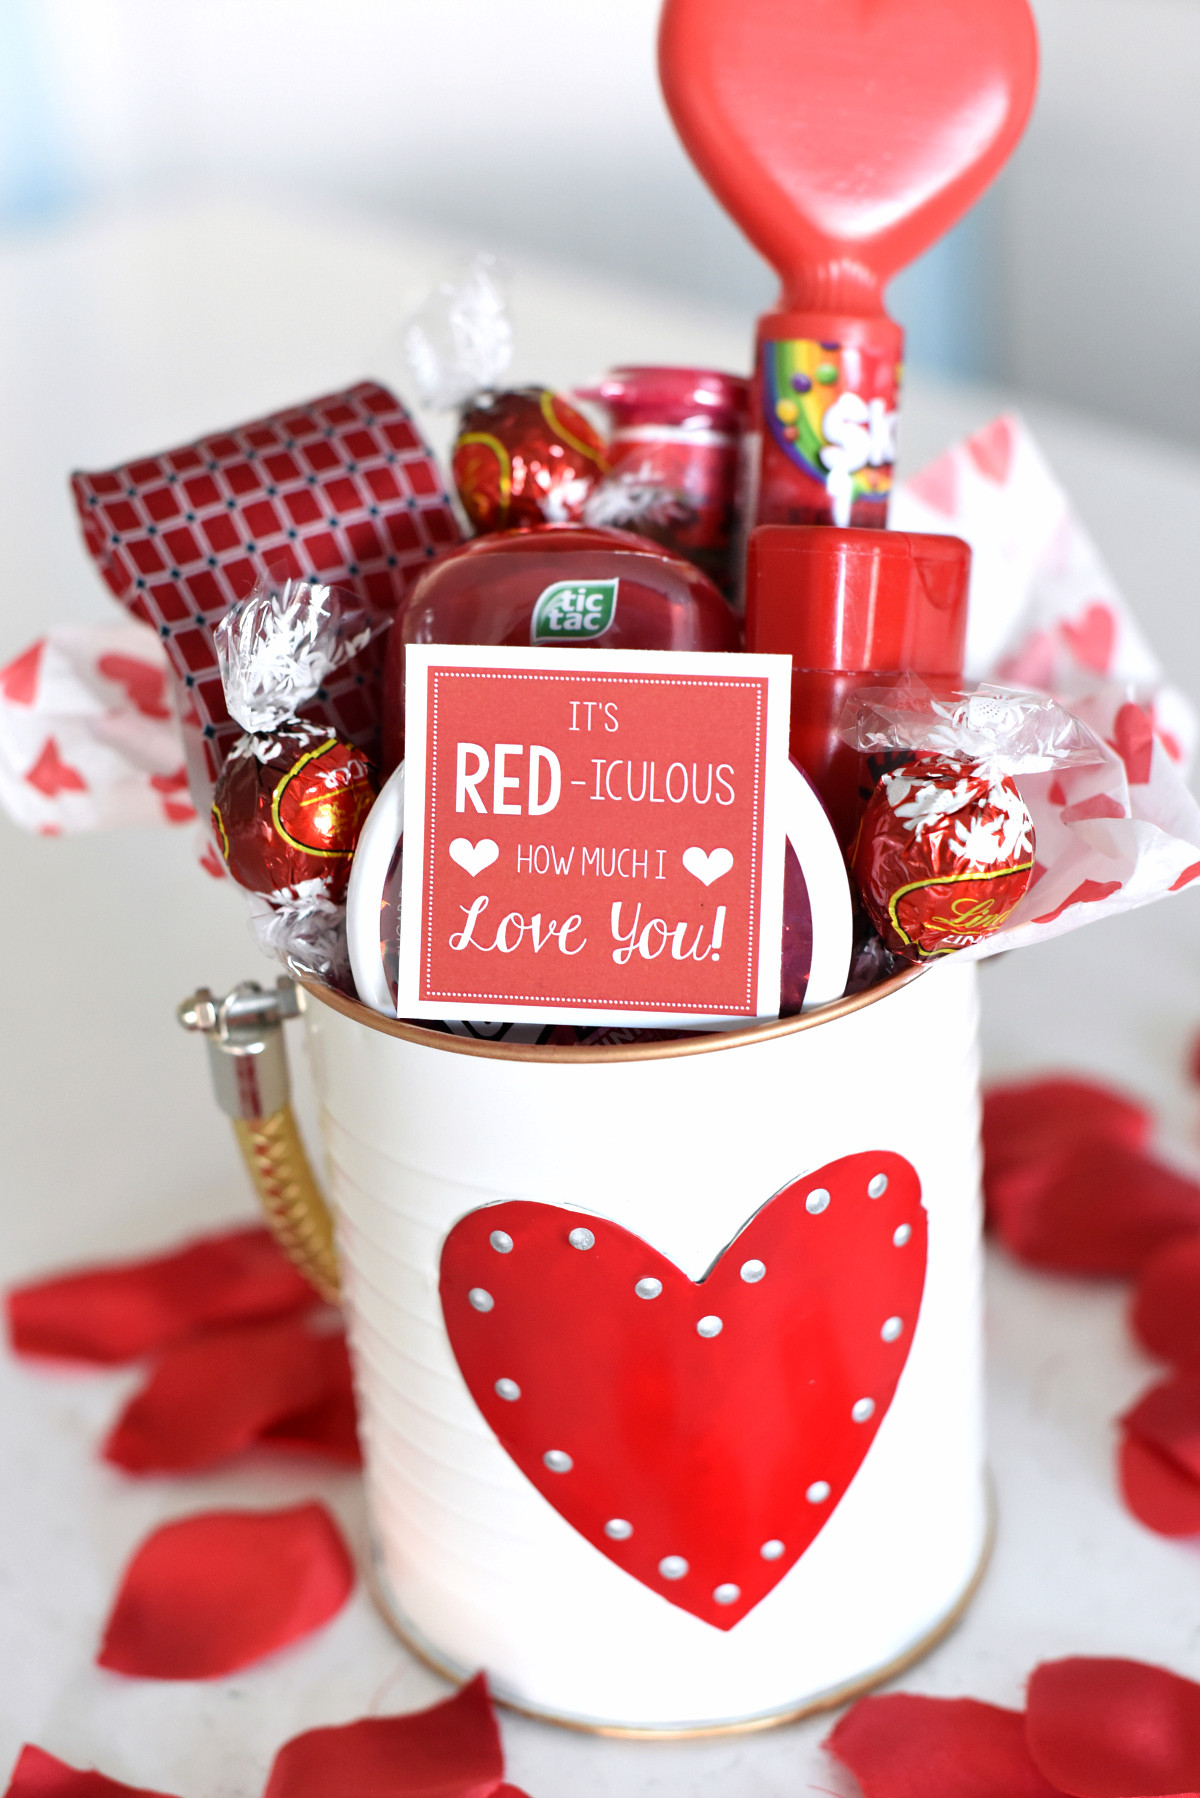 Best Valentines Day Gift Ideas
 Cute Valentine s Day Gift Idea RED iculous Basket